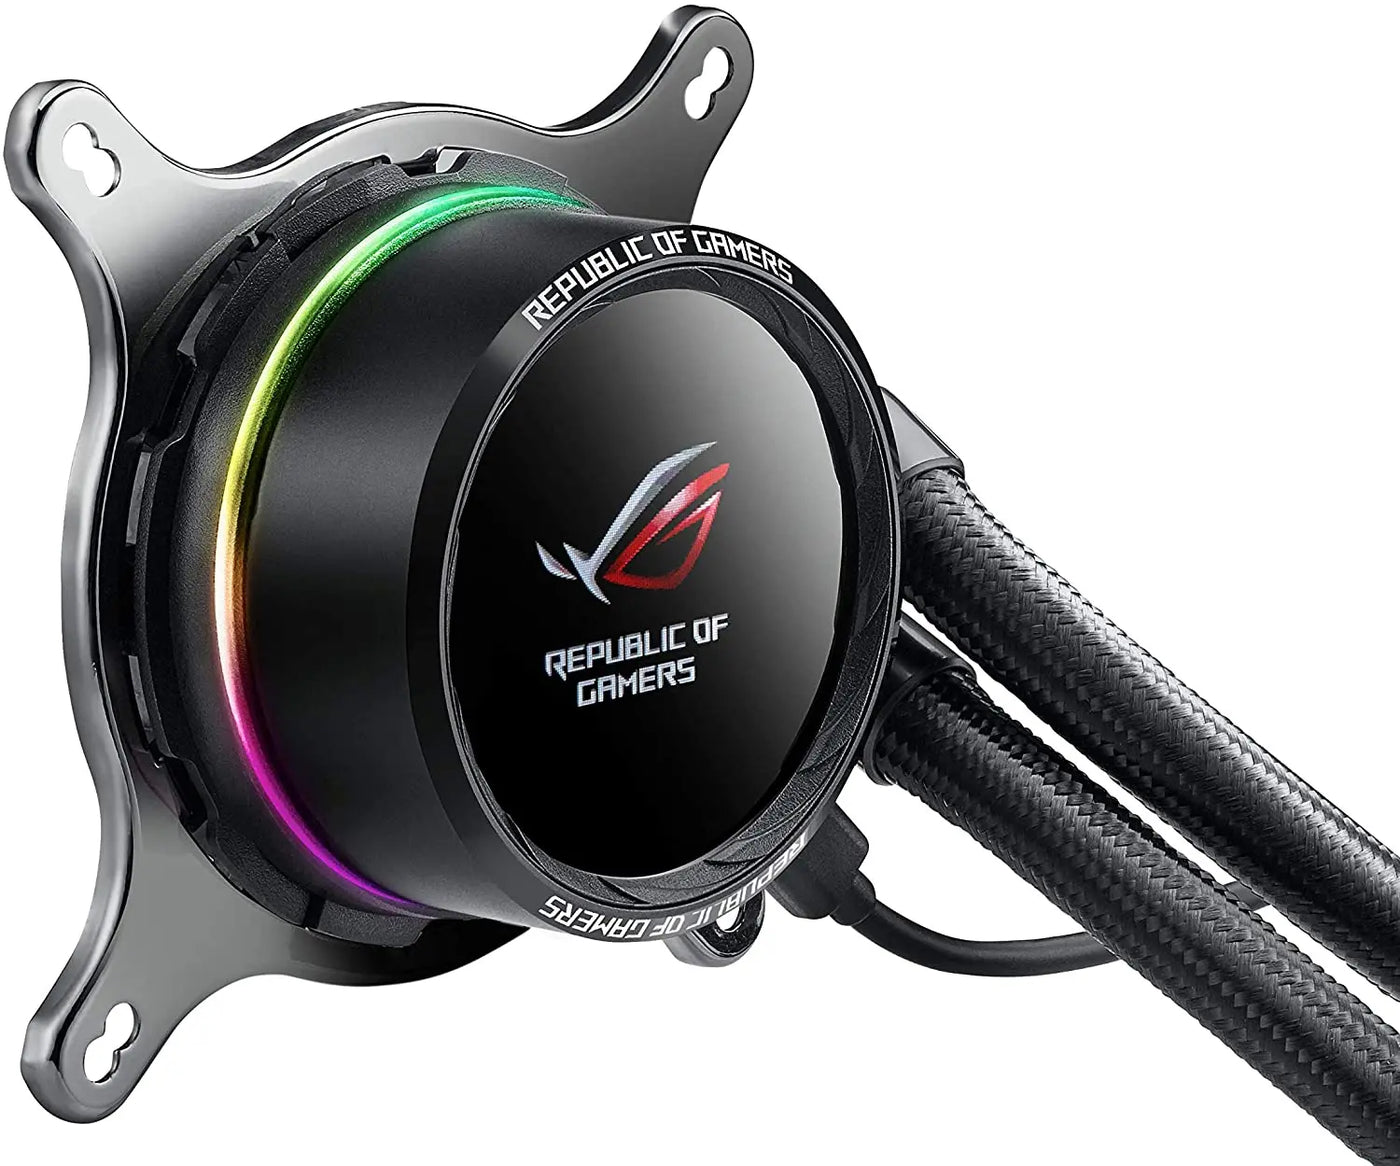 ROG RYUO PERFORMANCE AIO CPU LIQUID COOLER WITH OLED DISPLAY - 240MM Vyral